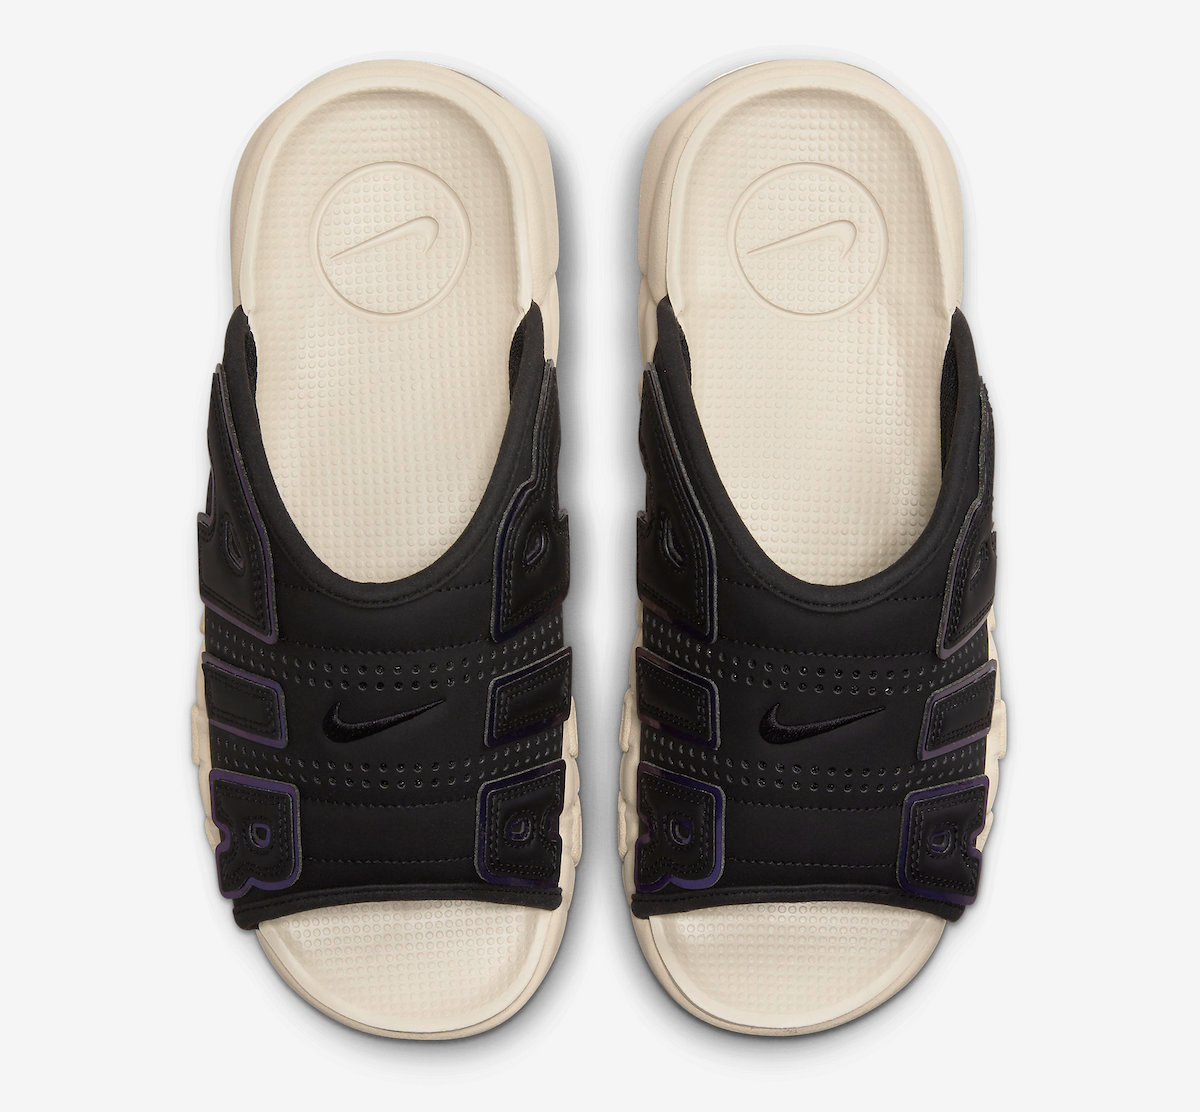 Official Images: New Nike Air More Uptempo Slides On the Way